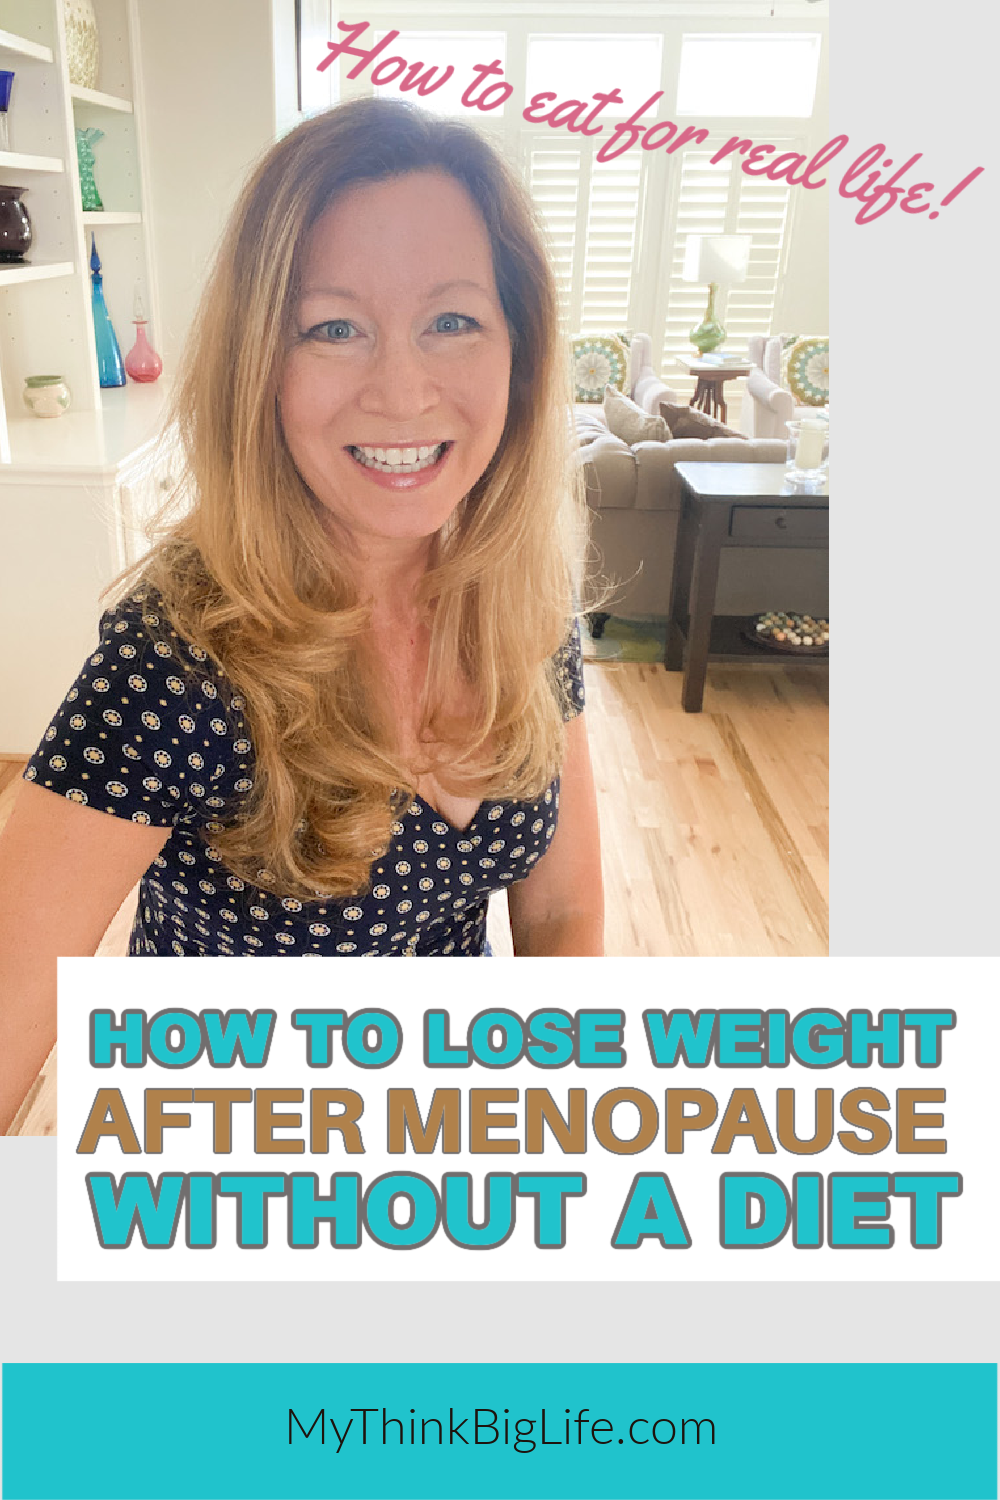 Picture of post author Sara with words: How to lose weight after menopause without dieting